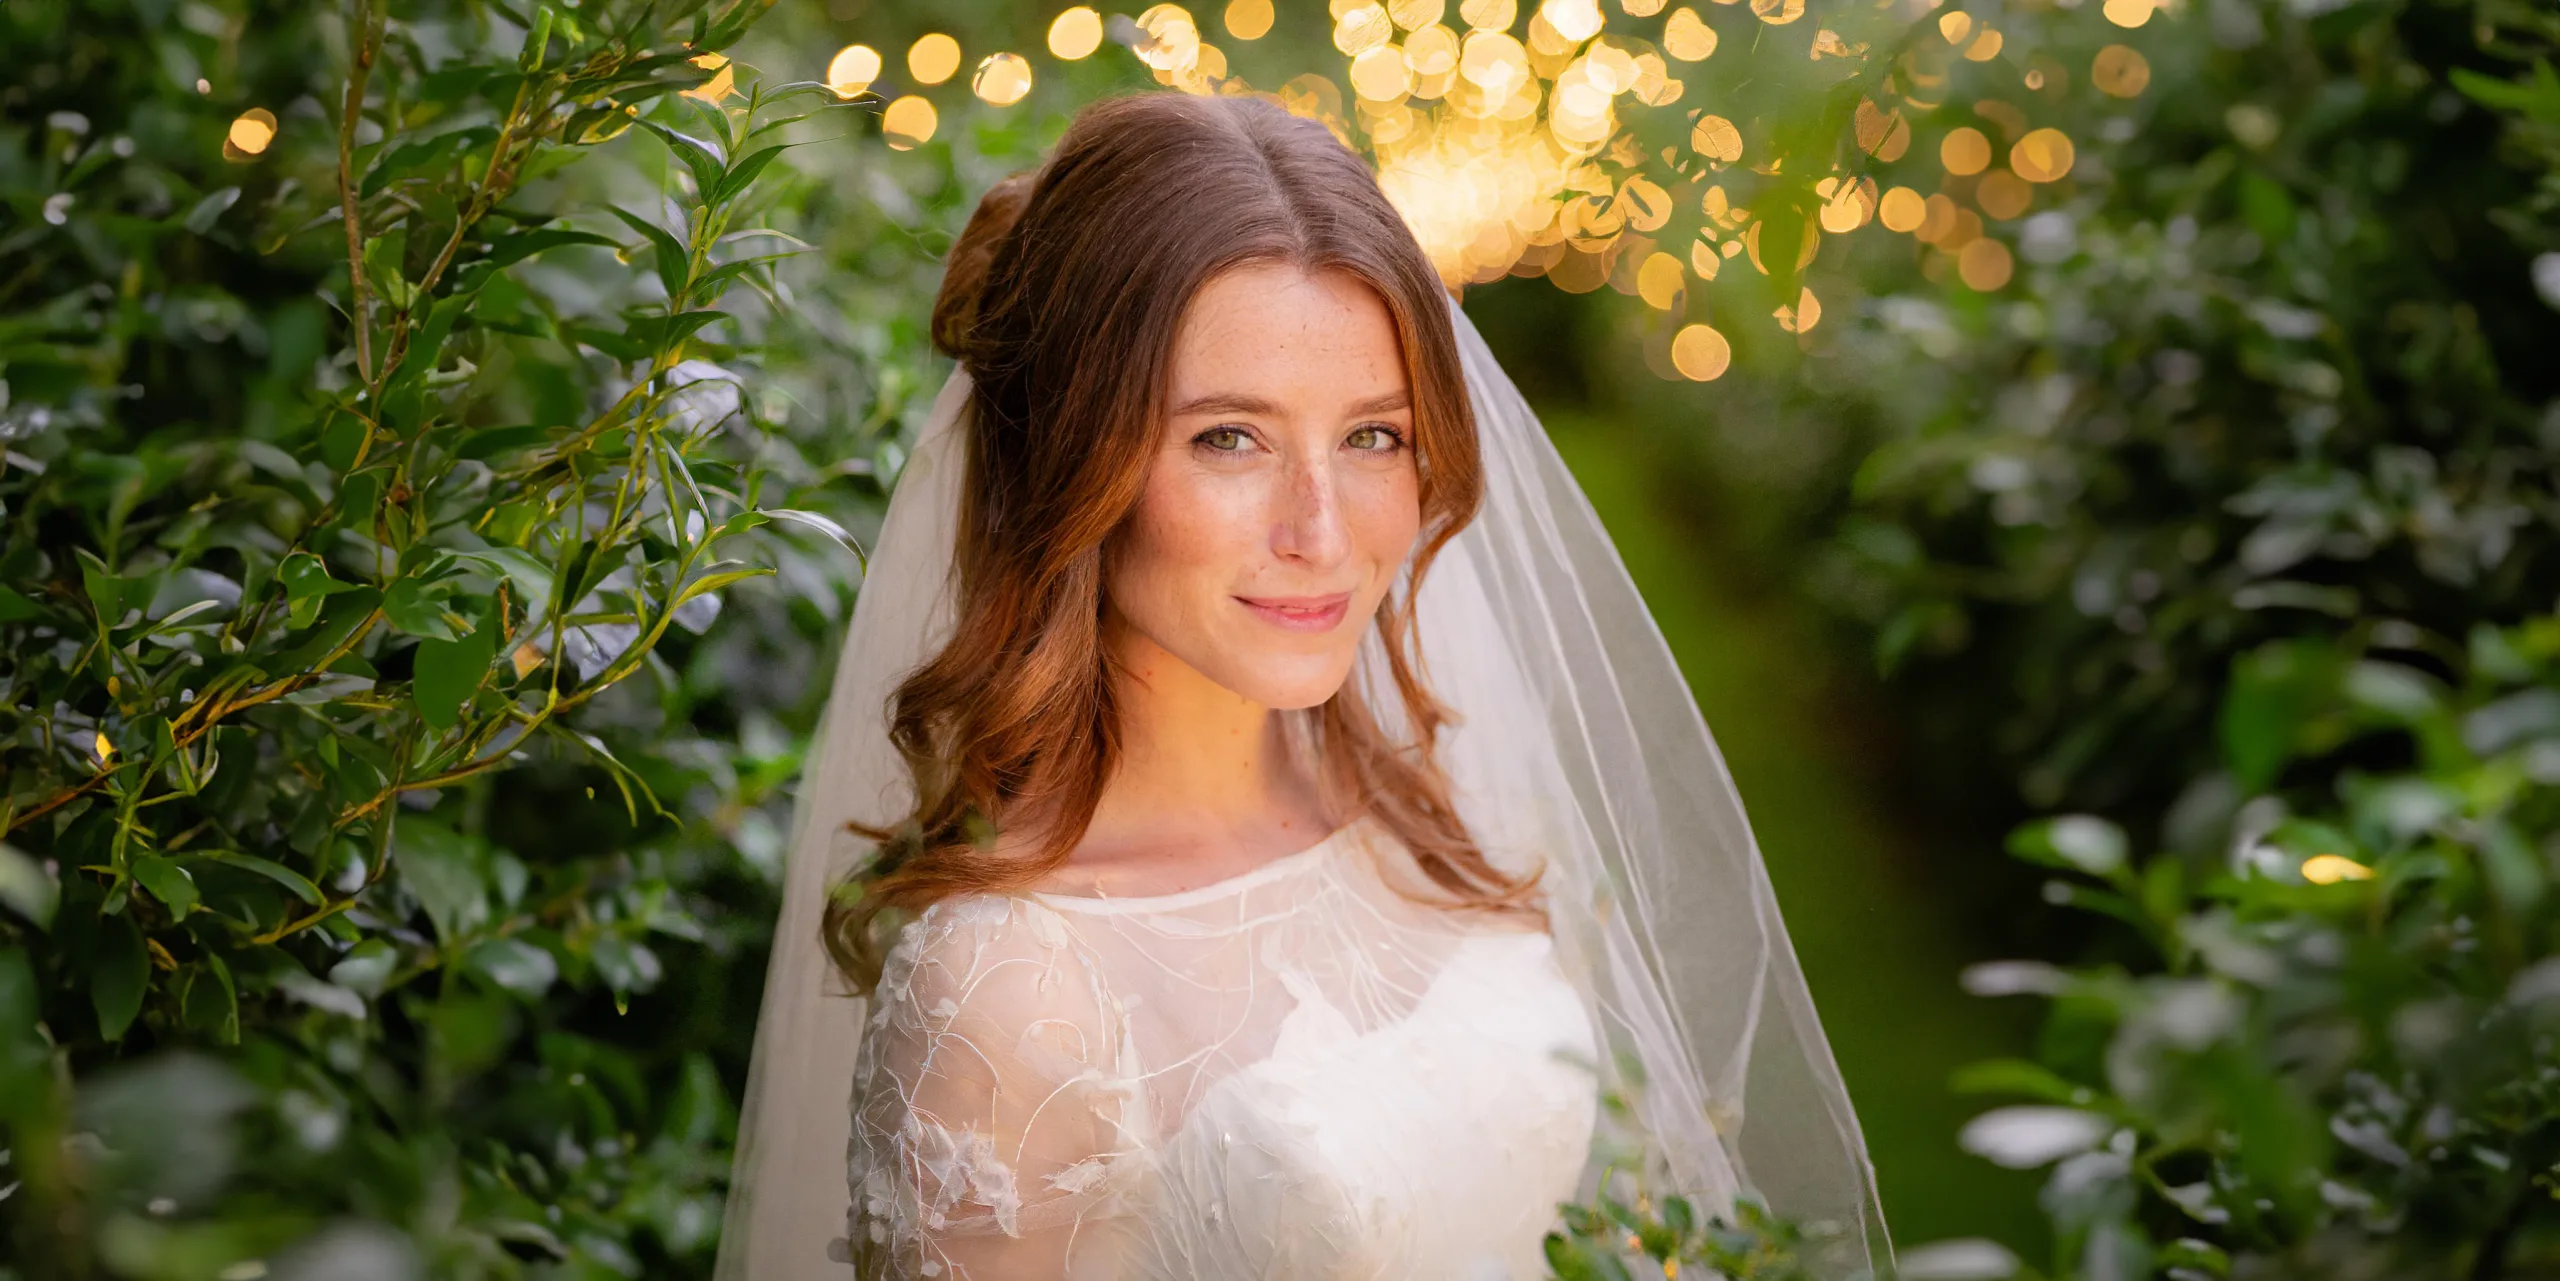 Detailed Photo of a Bride in white dress among greenery Manor House Castle Combe